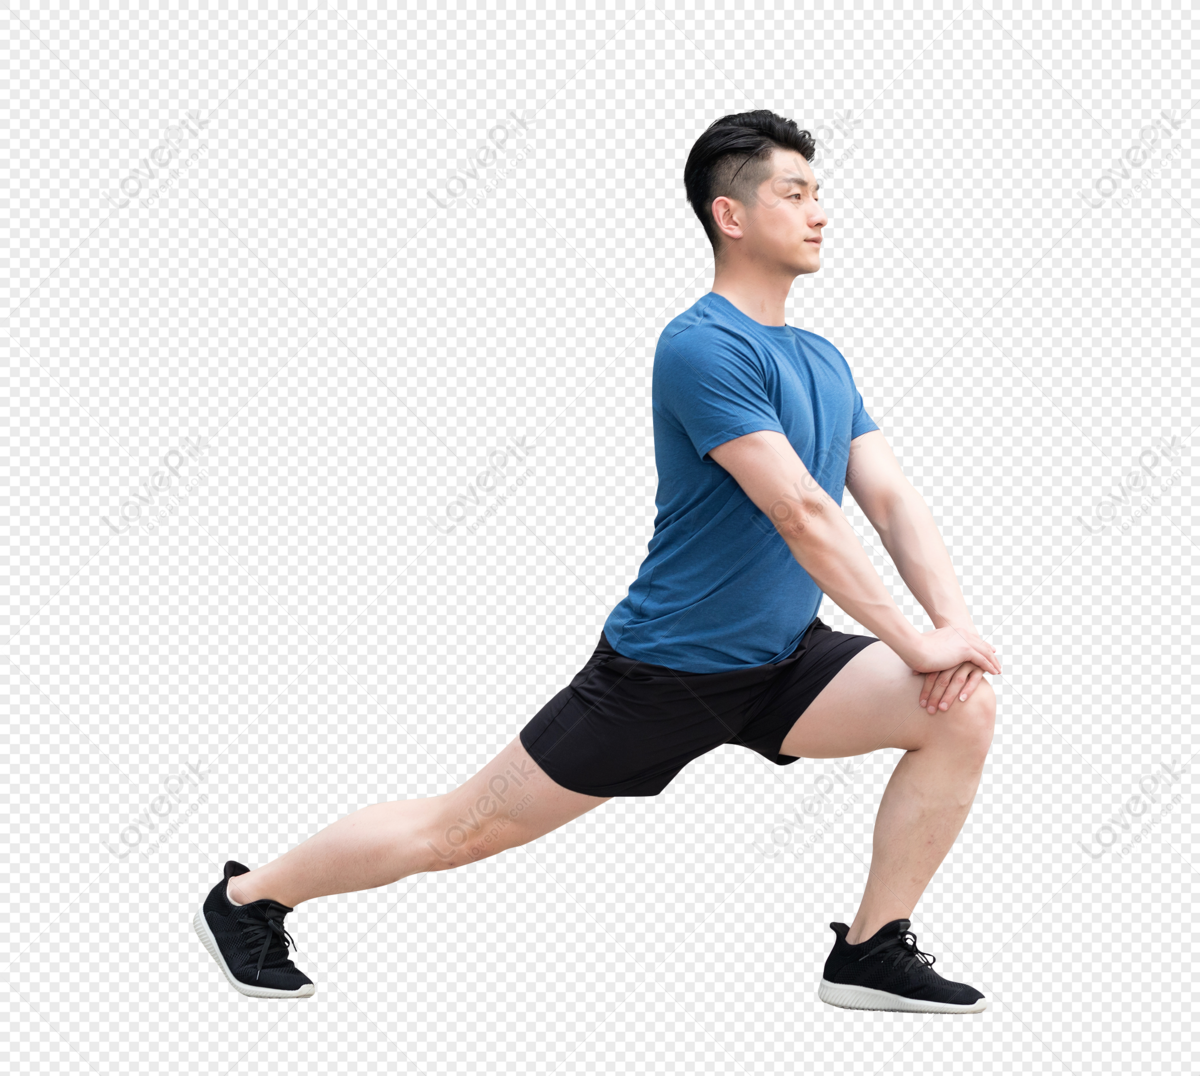 Outdoor Workout Young Man In Athletic Attire Engages In Stretching And  Warmup Exercises At Daytime Photo Background And Picture For Free Download  - Pngtree